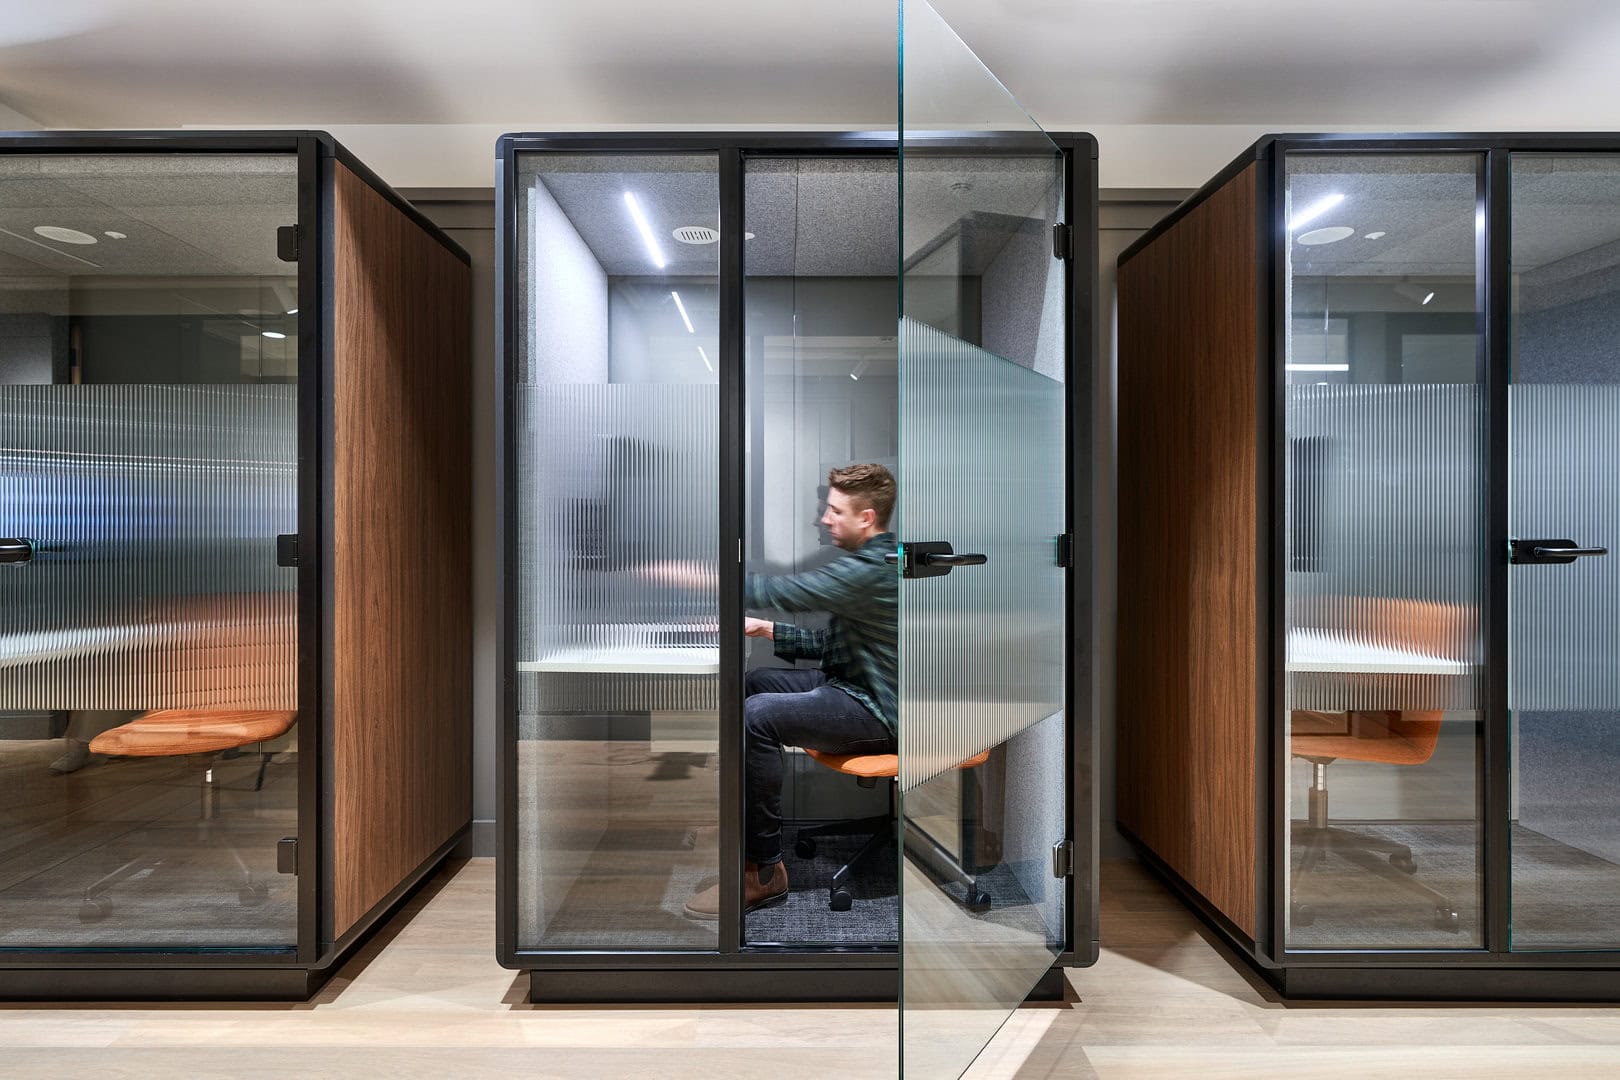 A man sits working in a privacy booth inside an office.